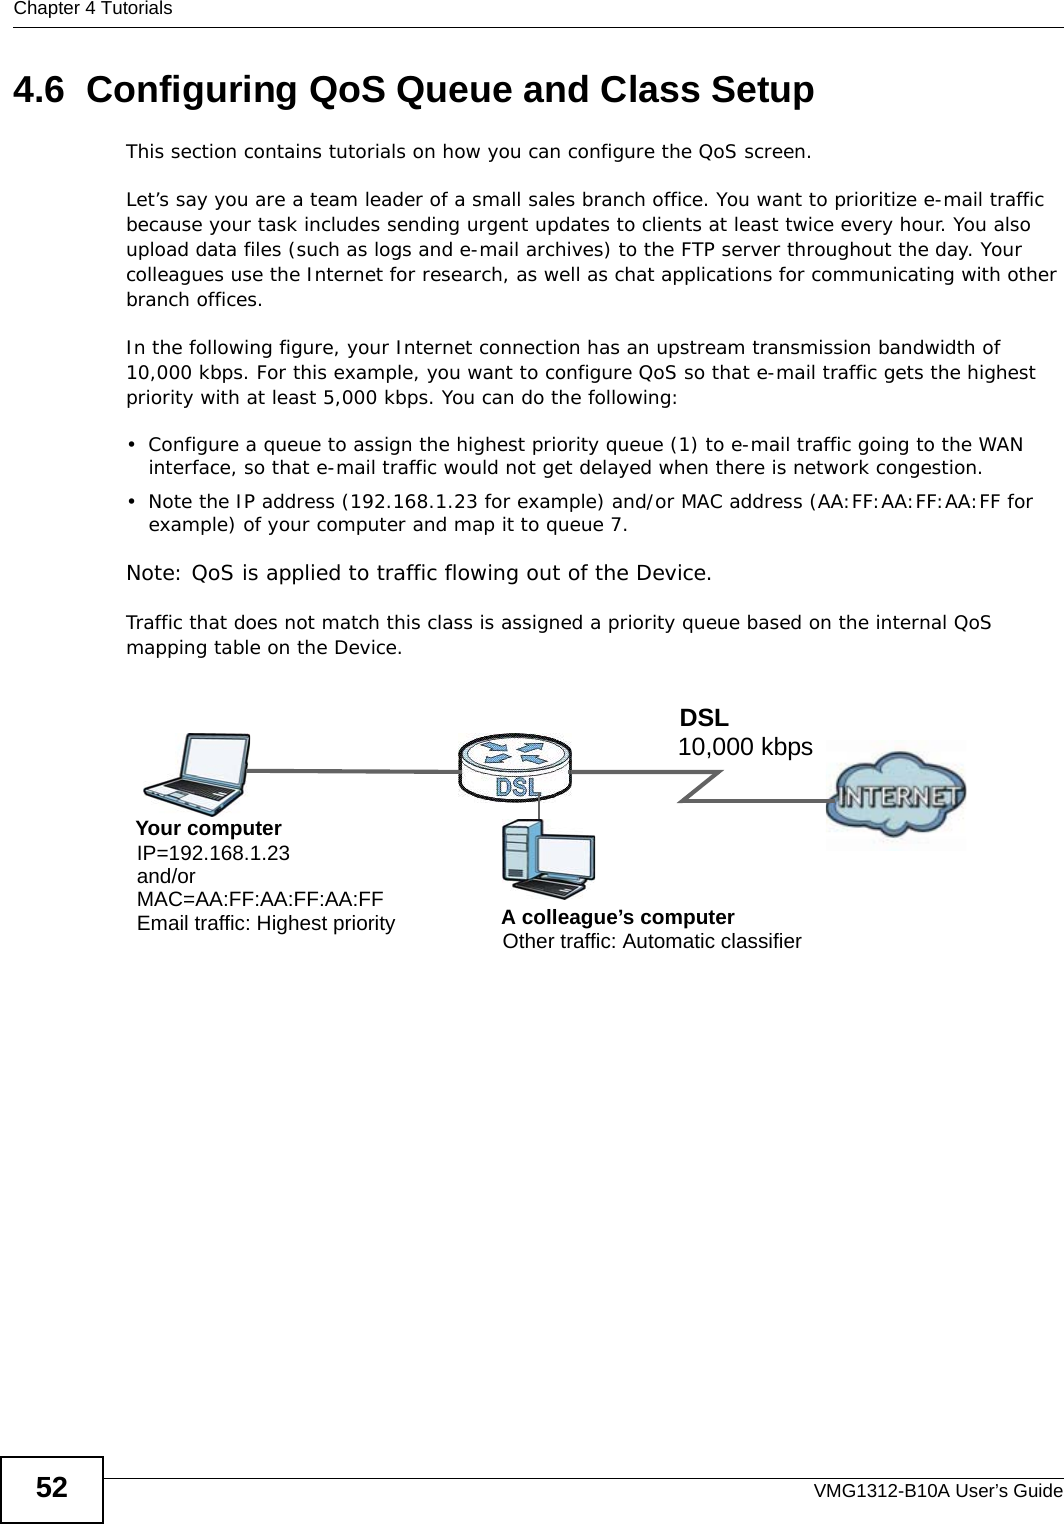 Chapter 4 TutorialsVMG1312-B10A User’s Guide524.6  Configuring QoS Queue and Class SetupThis section contains tutorials on how you can configure the QoS screen.Let’s say you are a team leader of a small sales branch office. You want to prioritize e-mail traffic because your task includes sending urgent updates to clients at least twice every hour. You also upload data files (such as logs and e-mail archives) to the FTP server throughout the day. Your colleagues use the Internet for research, as well as chat applications for communicating with other branch offices.In the following figure, your Internet connection has an upstream transmission bandwidth of 10,000 kbps. For this example, you want to configure QoS so that e-mail traffic gets the highest priority with at least 5,000 kbps. You can do the following: • Configure a queue to assign the highest priority queue (1) to e-mail traffic going to the WAN interface, so that e-mail traffic would not get delayed when there is network congestion. • Note the IP address (192.168.1.23 for example) and/or MAC address (AA:FF:AA:FF:AA:FF for example) of your computer and map it to queue 7. Note: QoS is applied to traffic flowing out of the Device.Traffic that does not match this class is assigned a priority queue based on the internal QoS mapping table on the Device.QoS Example10,000 kbpsDSLYour computerIP=192.168.1.23A colleague’s computer Other traffic: Automatic classifierand/orMAC=AA:FF:AA:FF:AA:FFEmail traffic: Highest priority